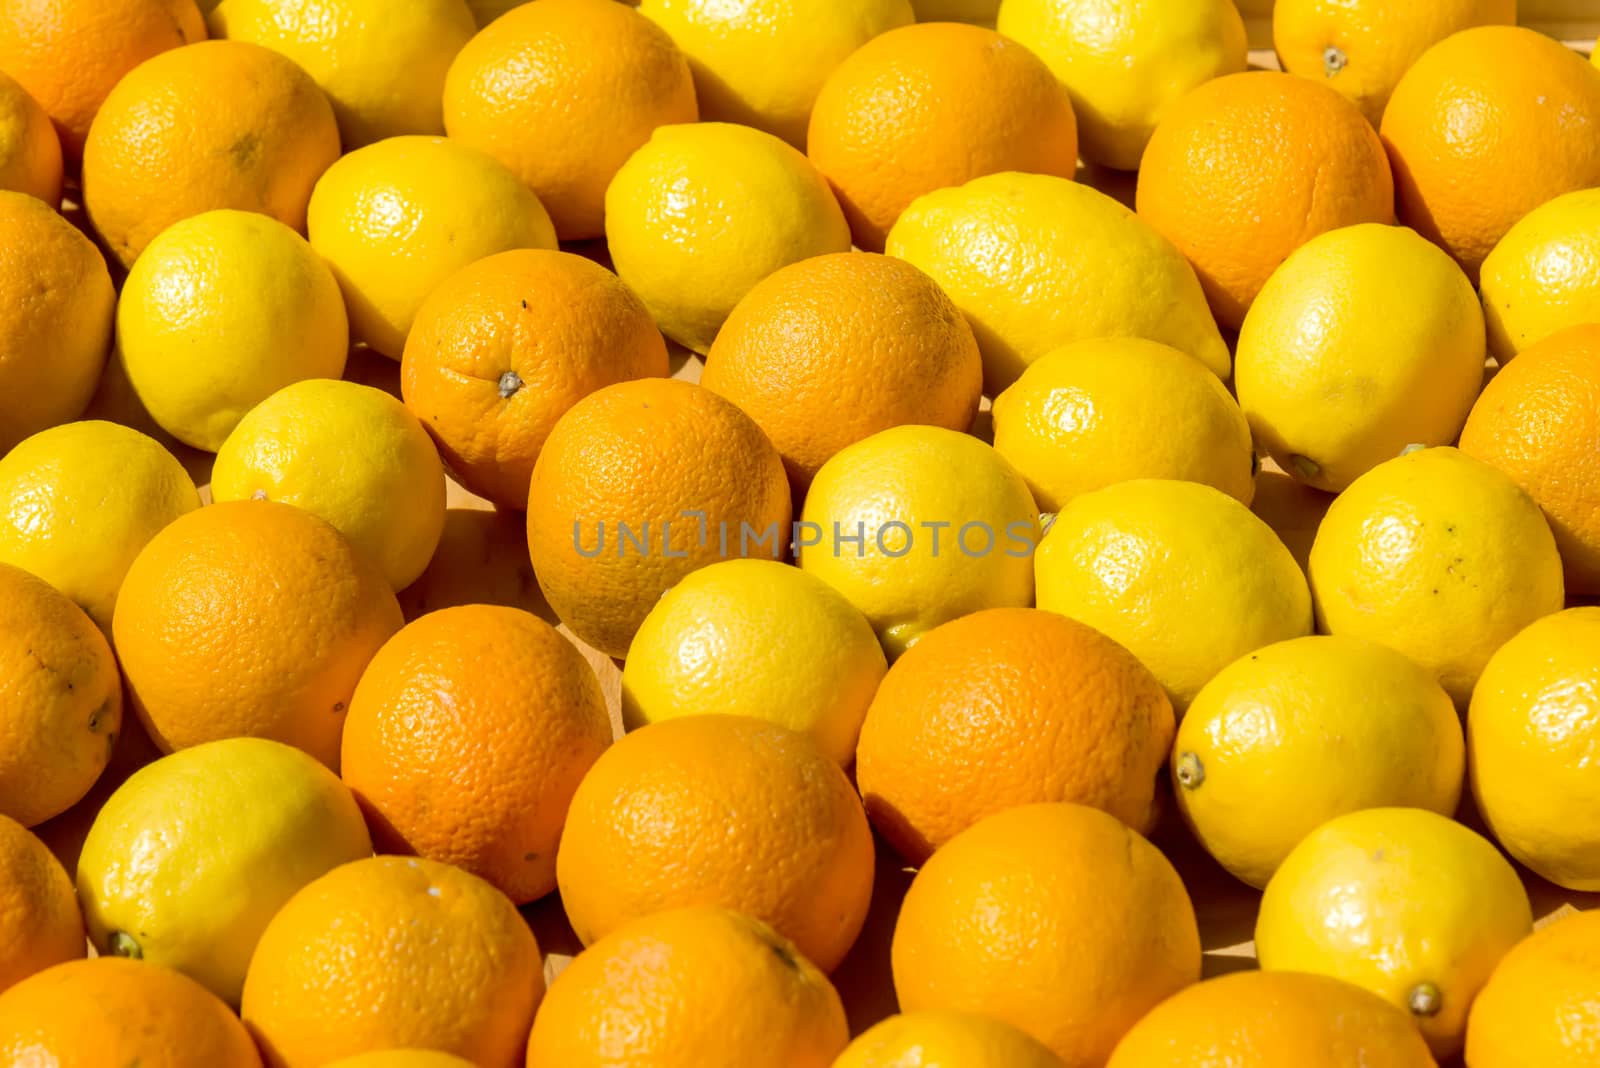 the fresh oranges in a wooden box